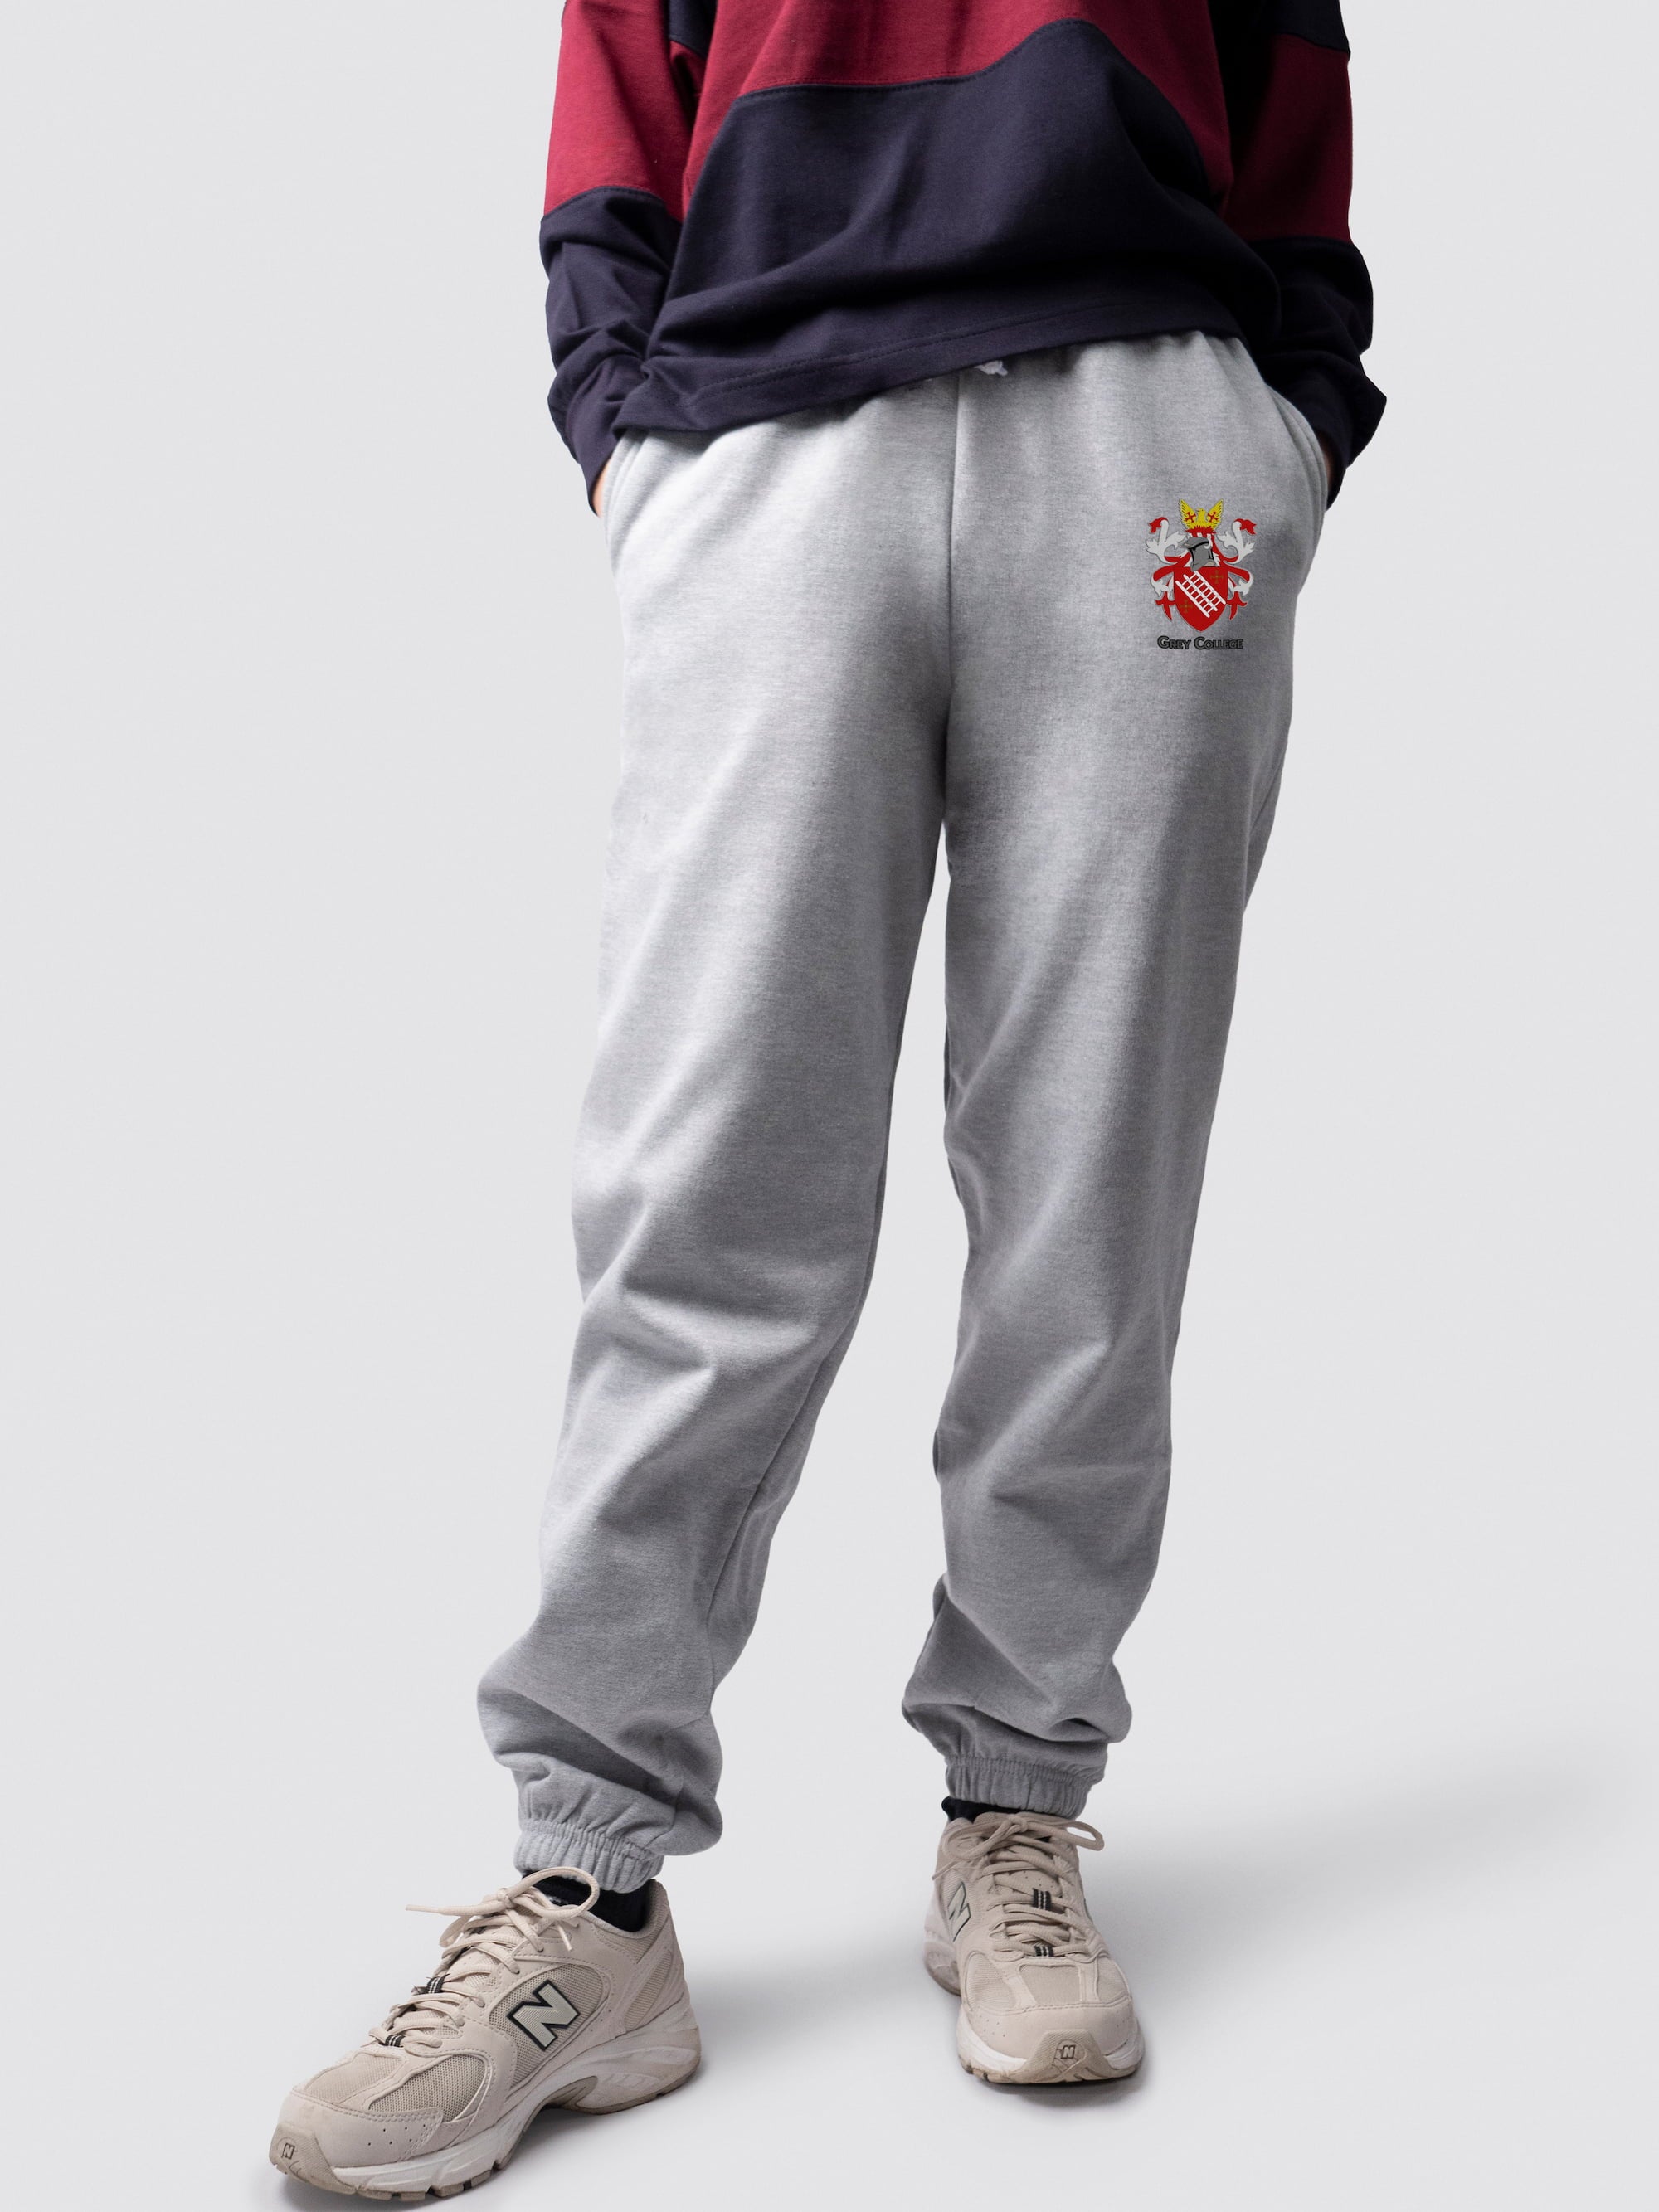 undergraduate cuffed sweatpants, made from soft cotton fabric, with Grey College logo